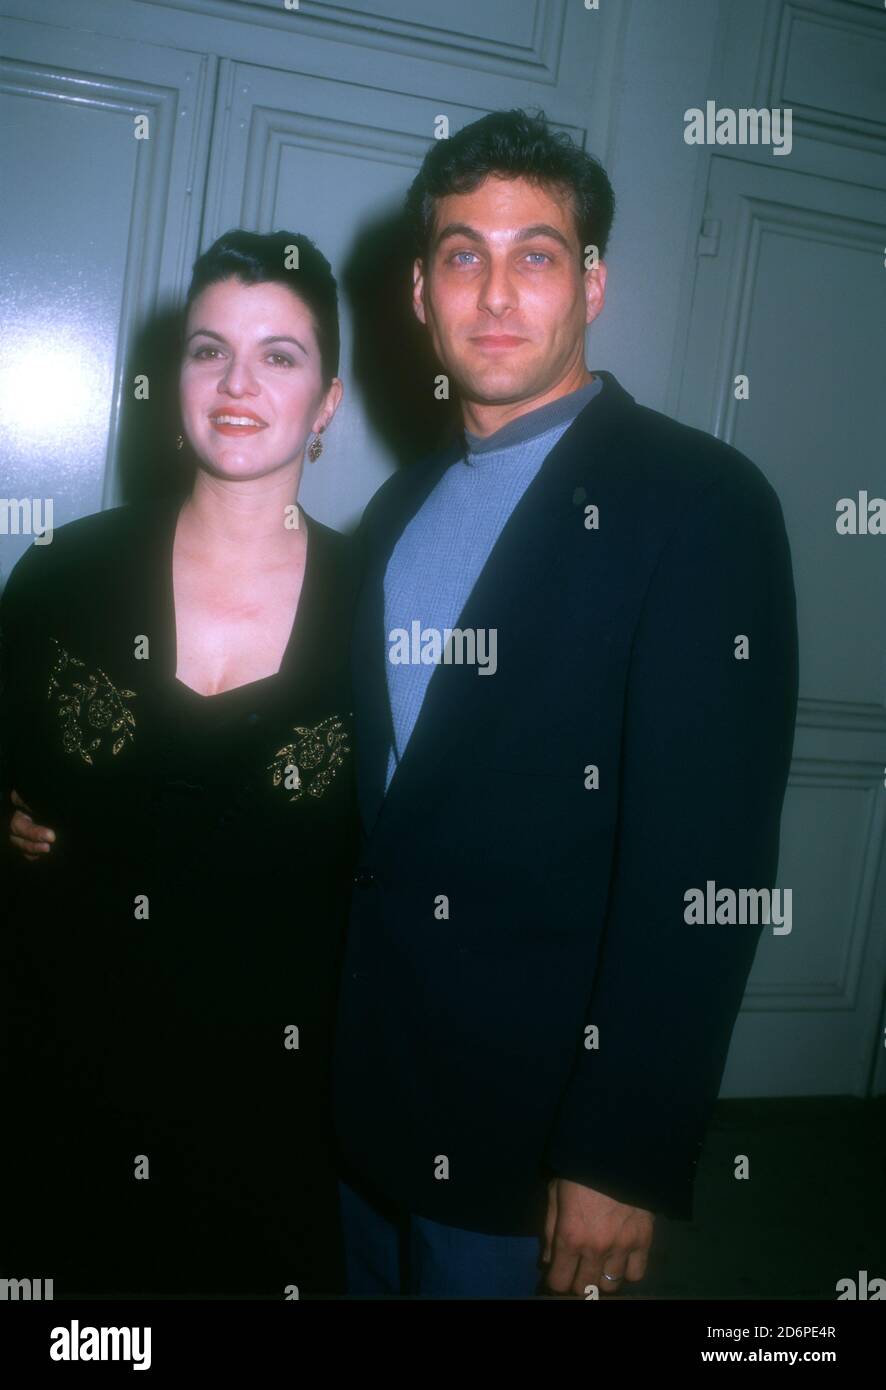 Westwood, California, USA 28th March 1996 Actor Jonathan Penner attends  Columbia Pictures' 'The Last Supper' Premiere on March 28, 1996 at Mann's  Festival Theatre in Westwood, California, USA. Photo by Barry King/Alamy